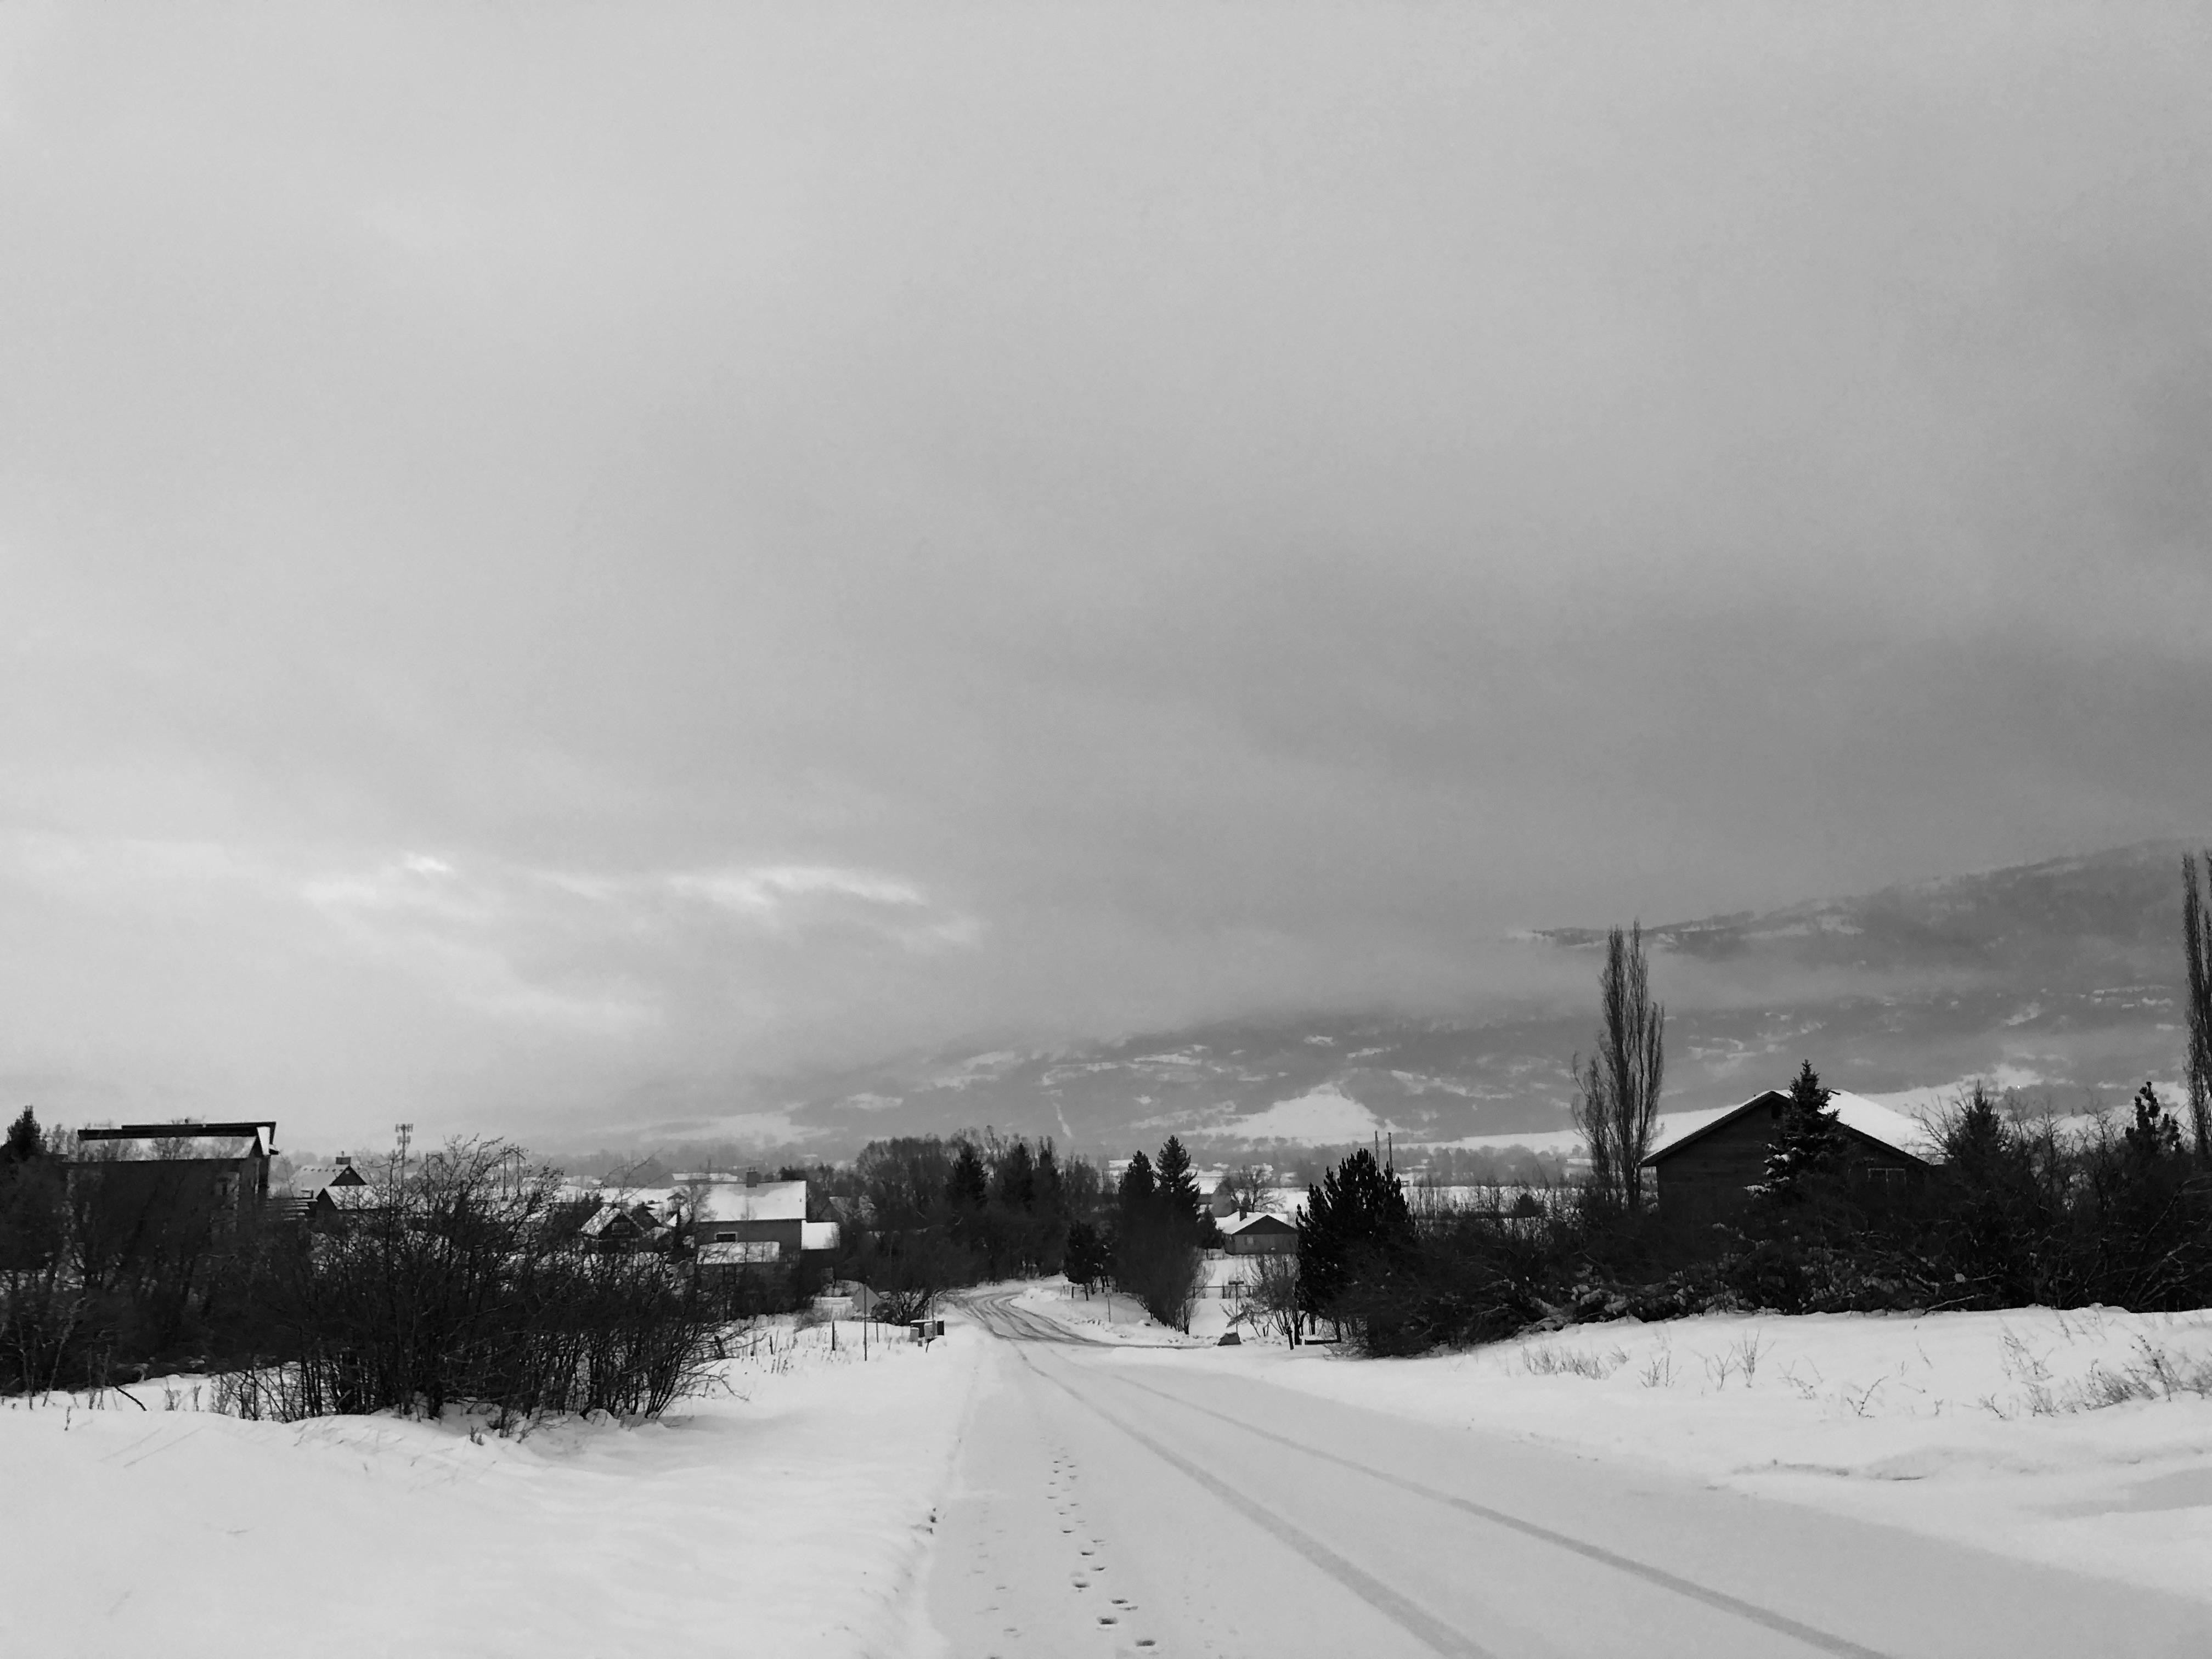 A black and white photo of a snow-covered hilly road leading down to a line of trees and houses, with a showy ridge shouded in the distance